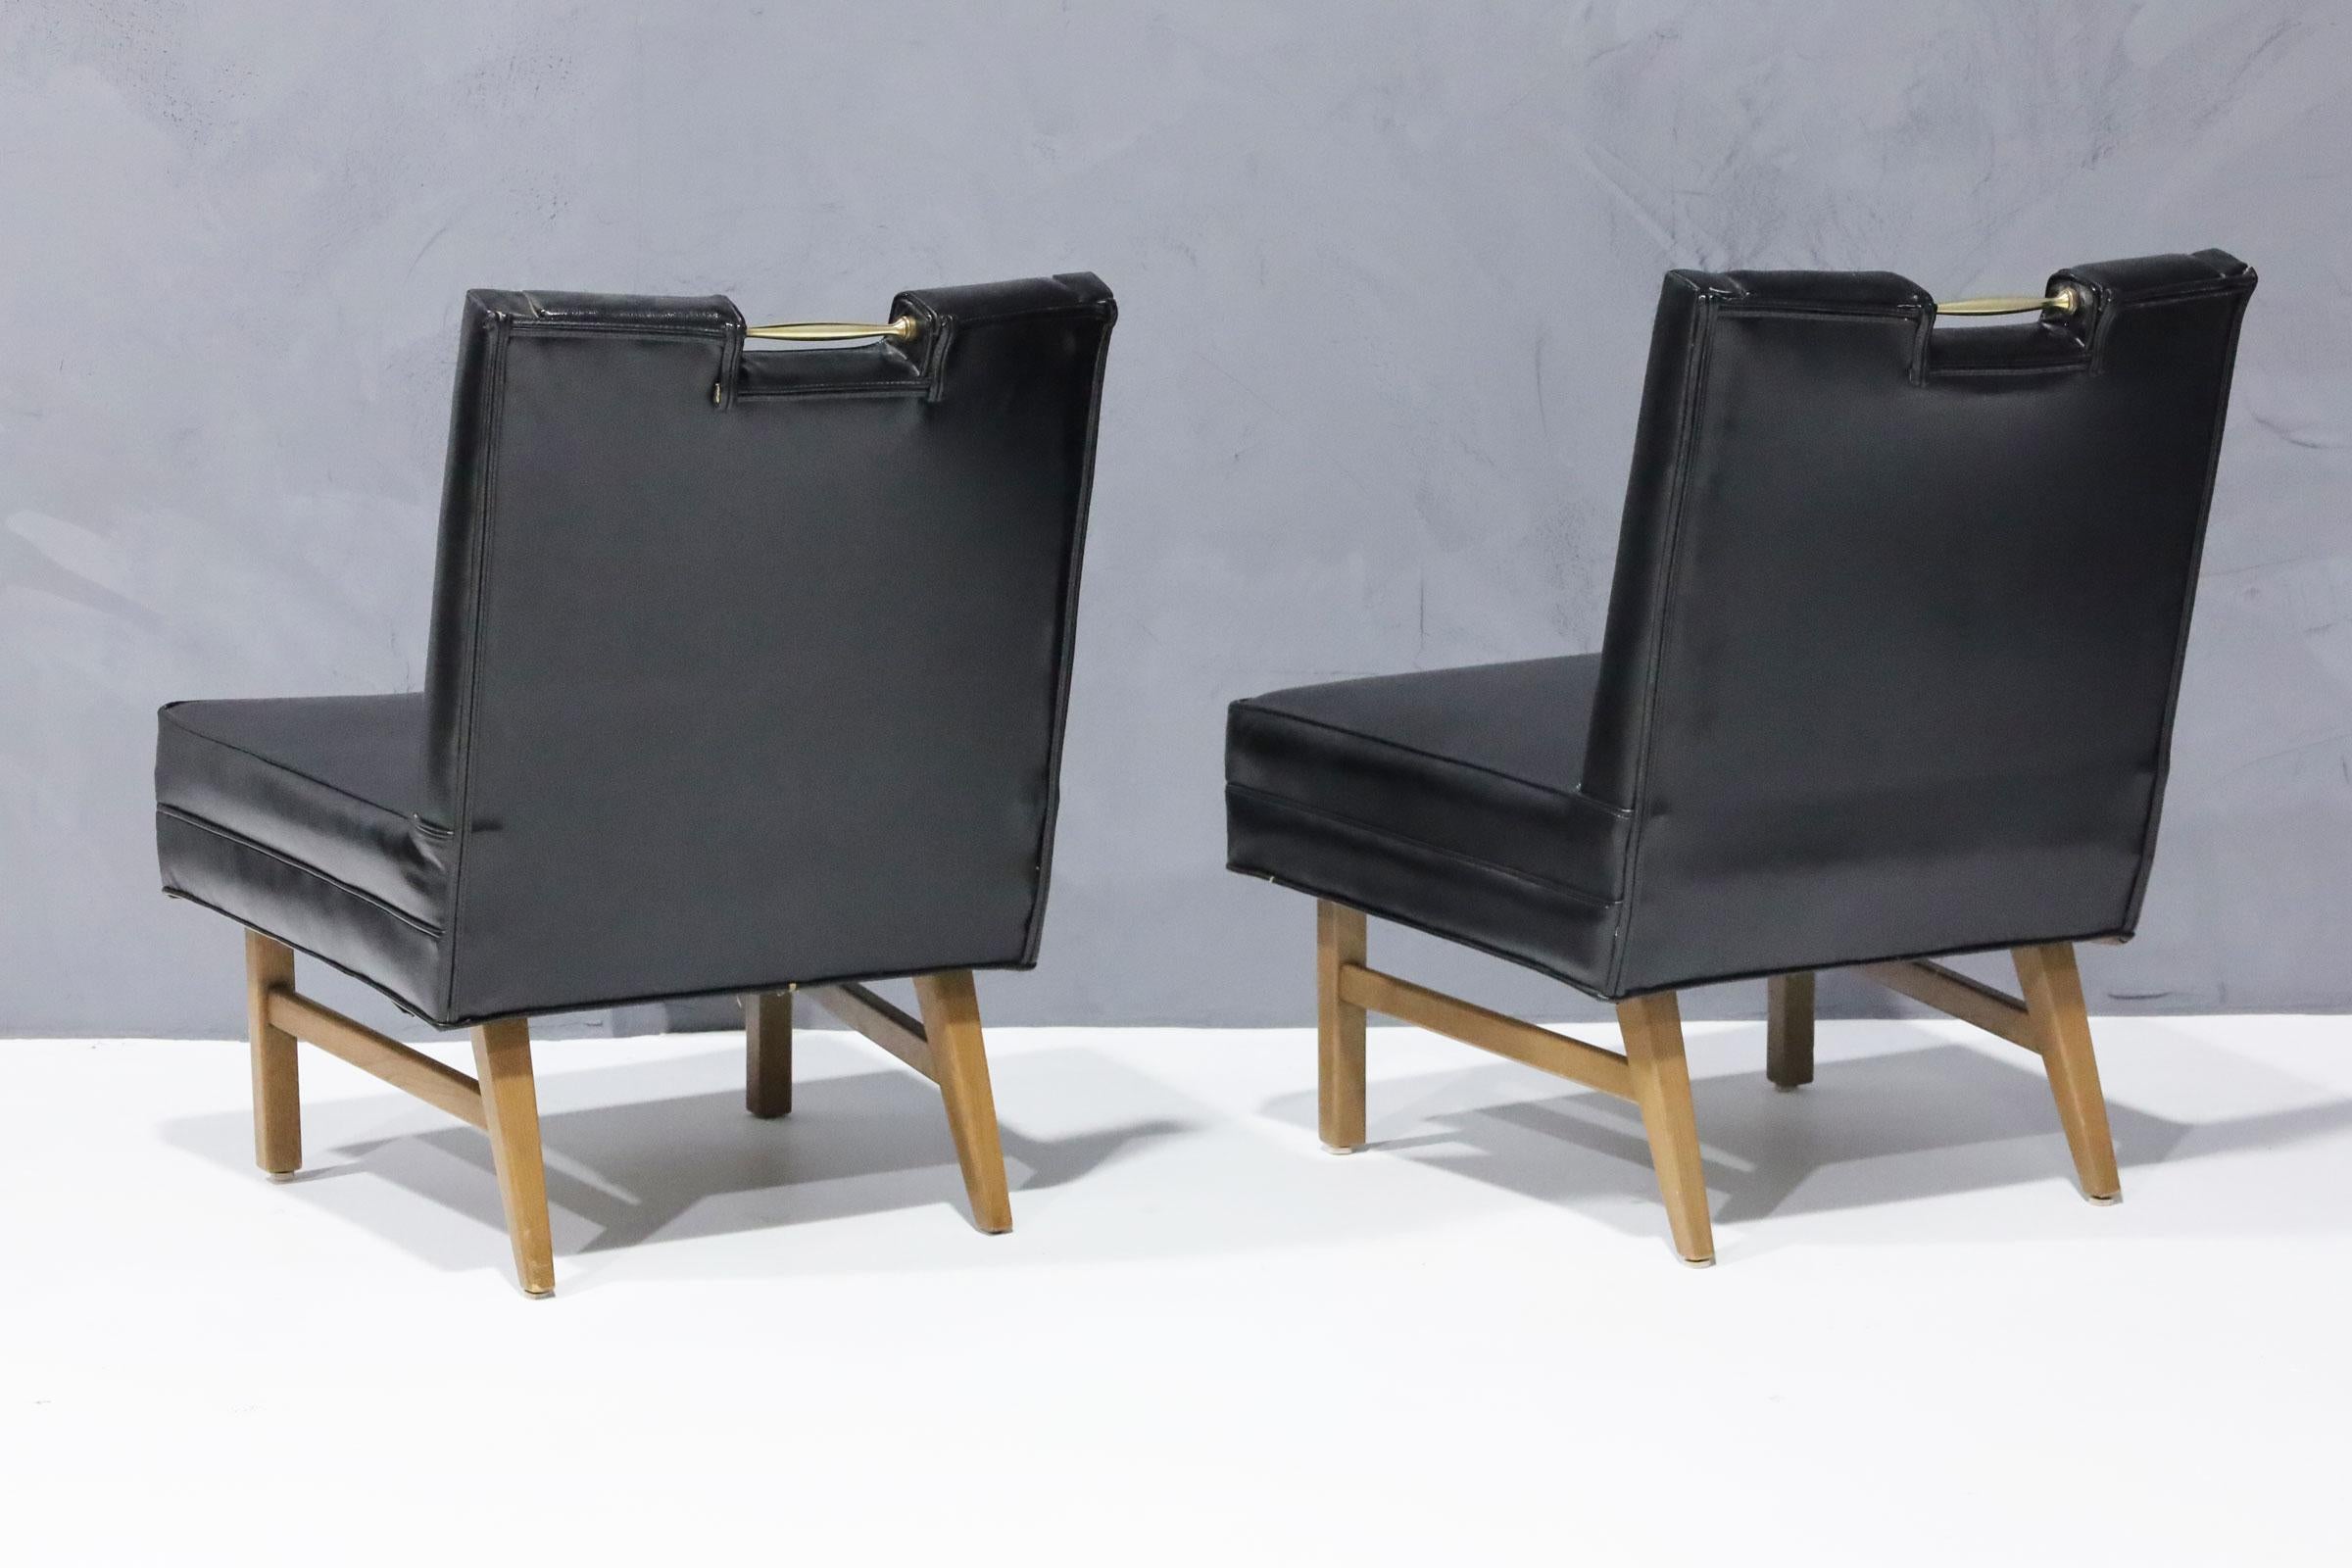 20th Century Merton Gershun Slipper Chairs in Faux Black Leather with Brass Pulls